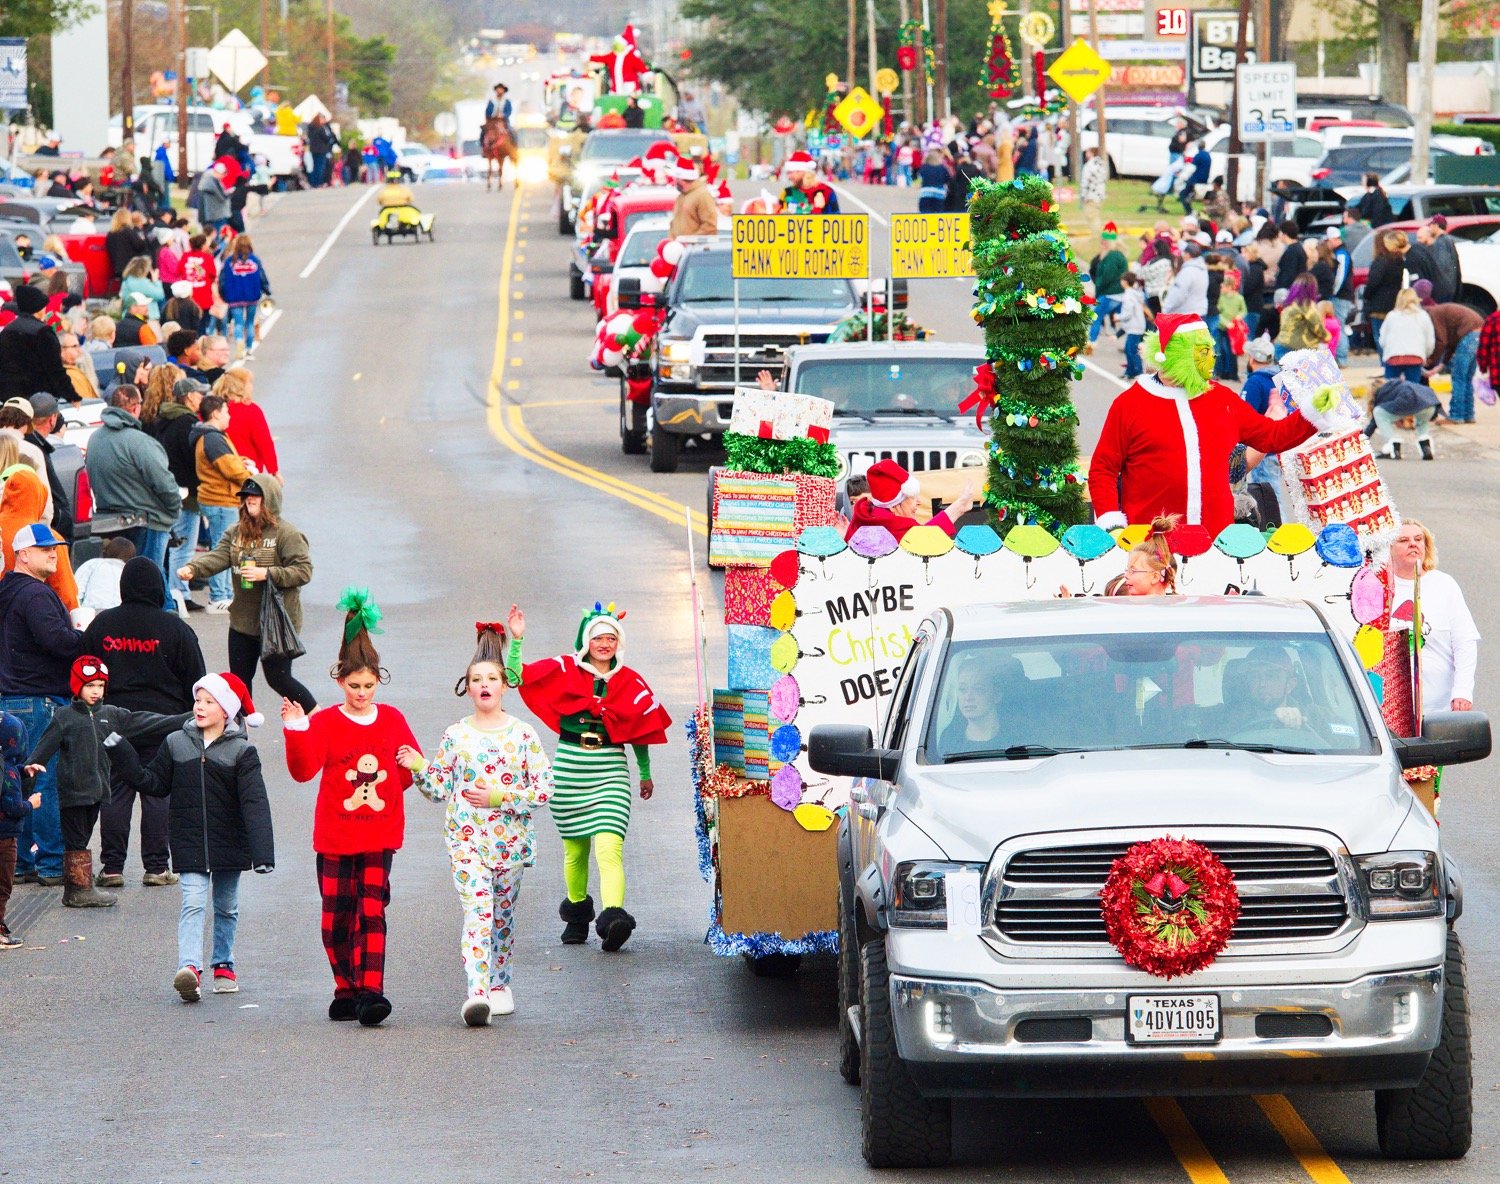 Quitman's Christmas parade stretches along Goode St. [see more of the parade]